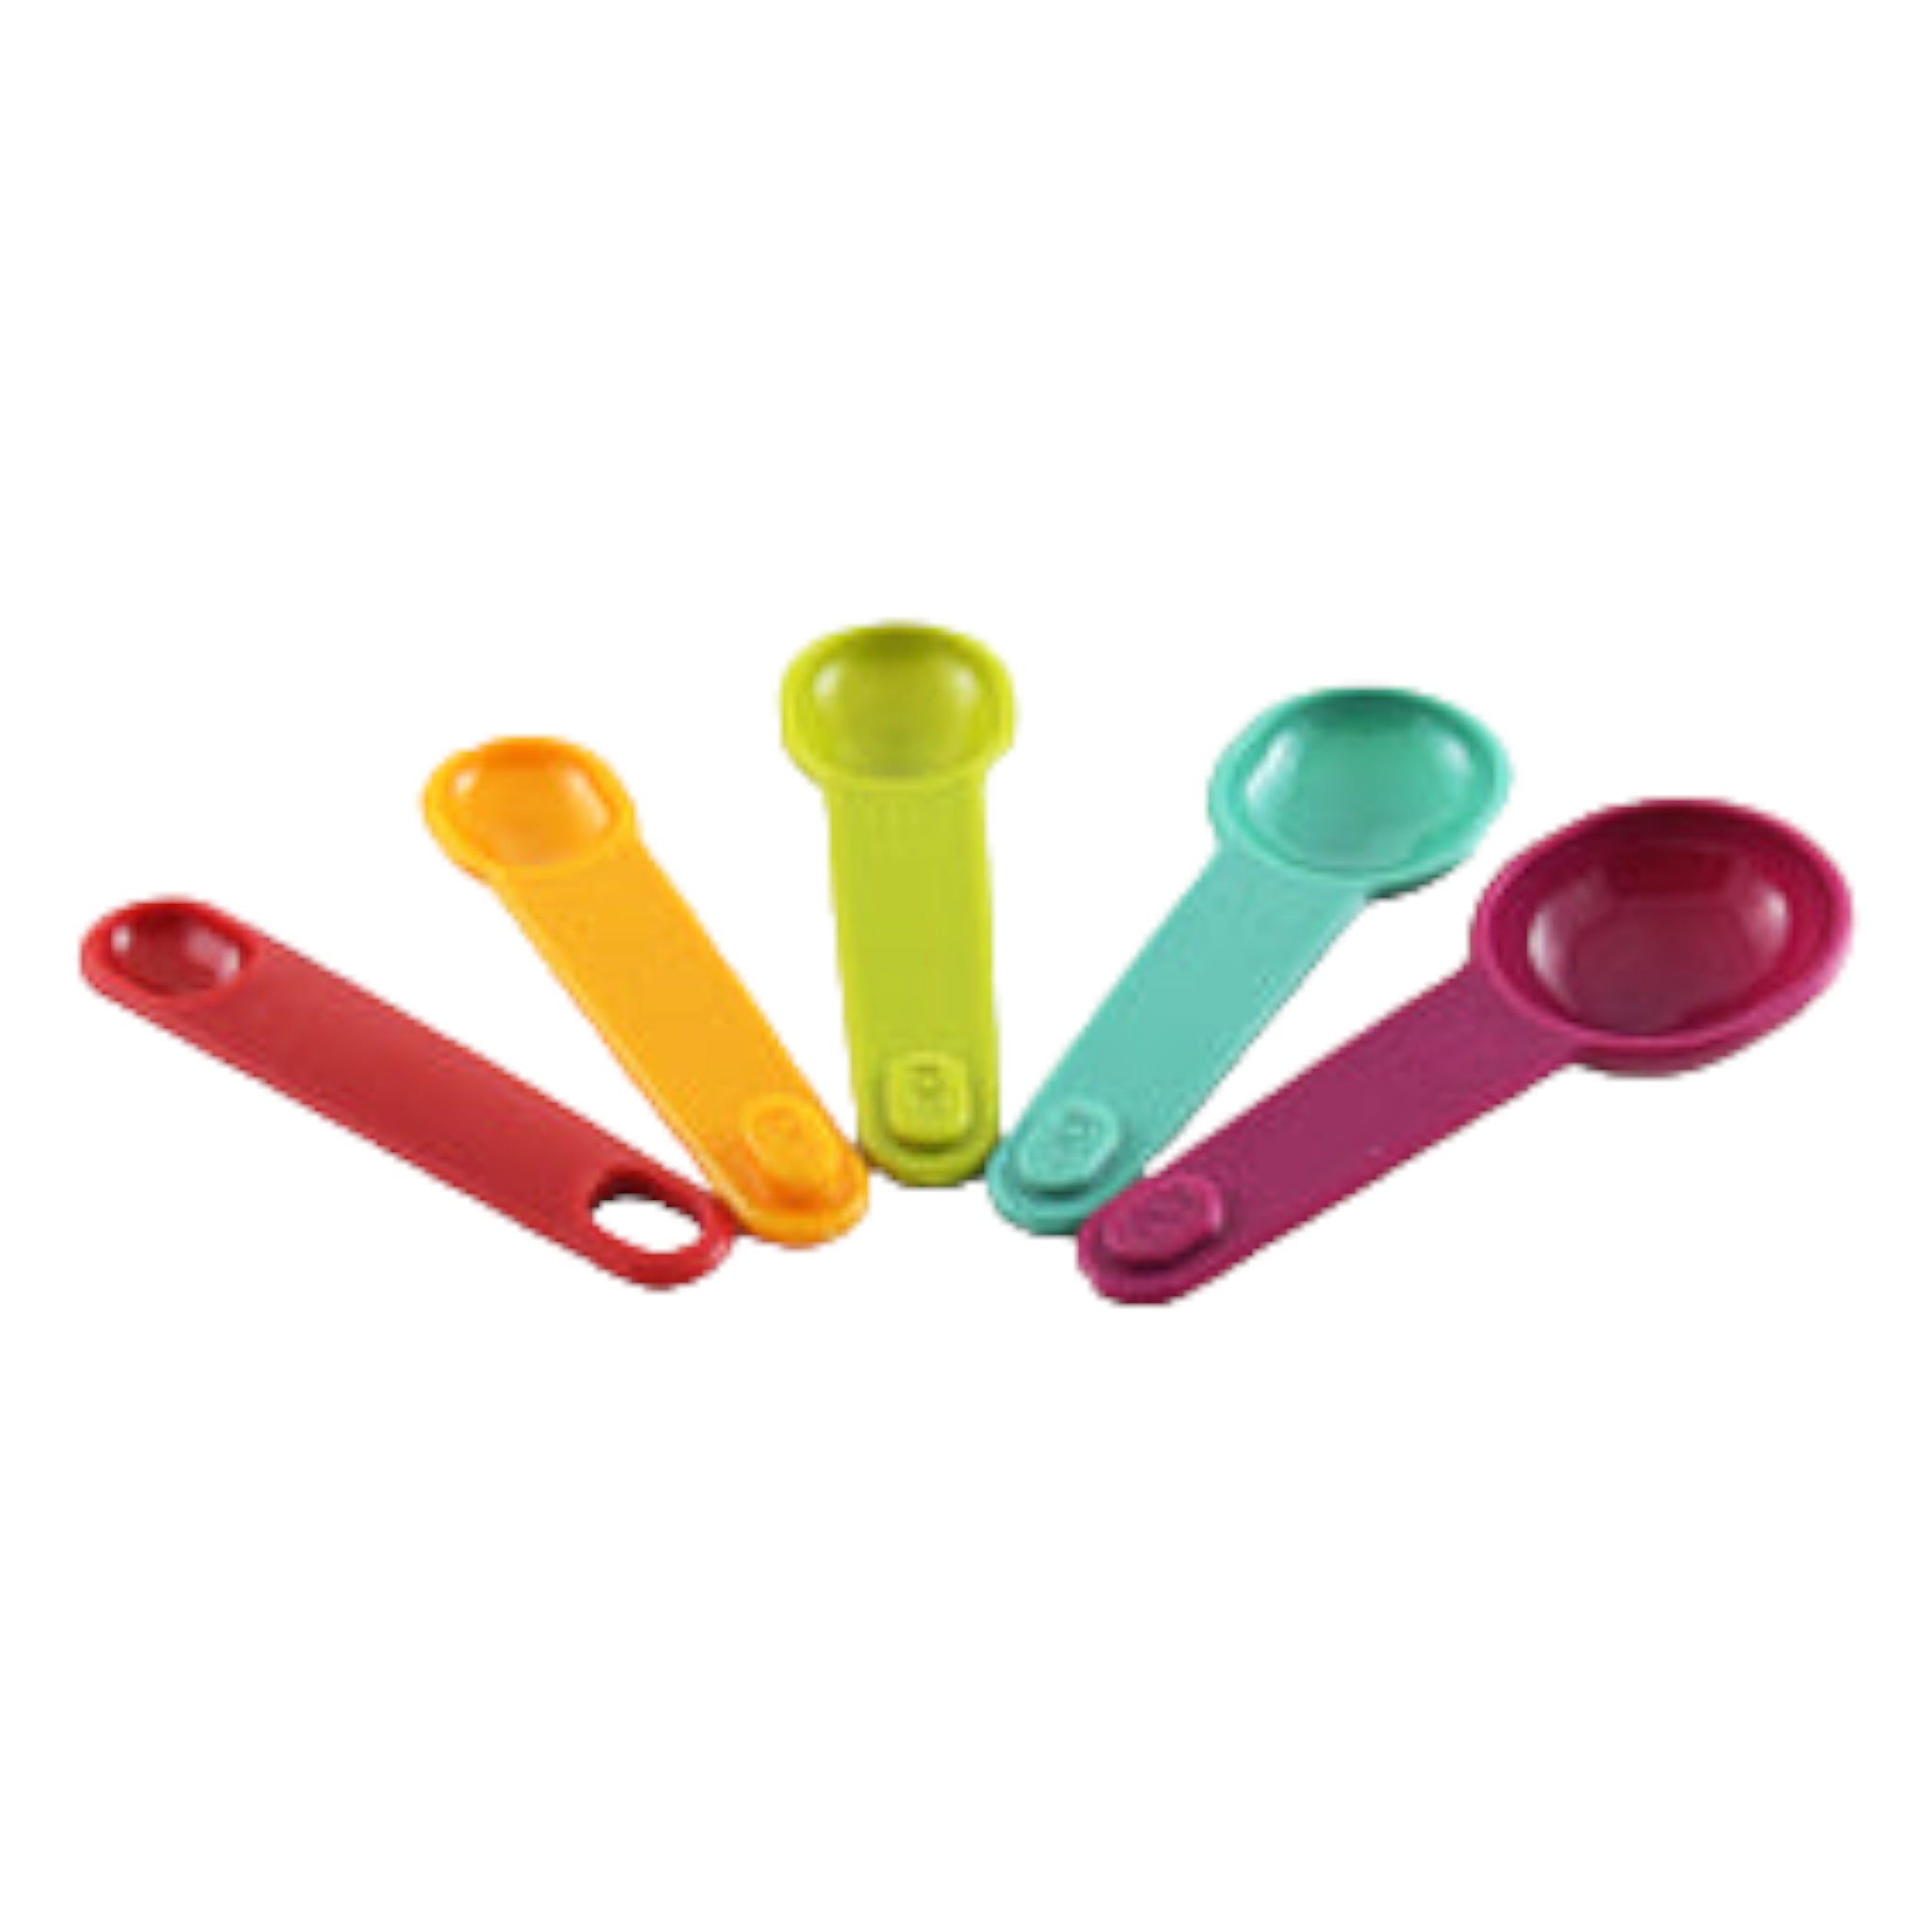 Joie Measuring Spoon 5pack Assorted Colour 15236